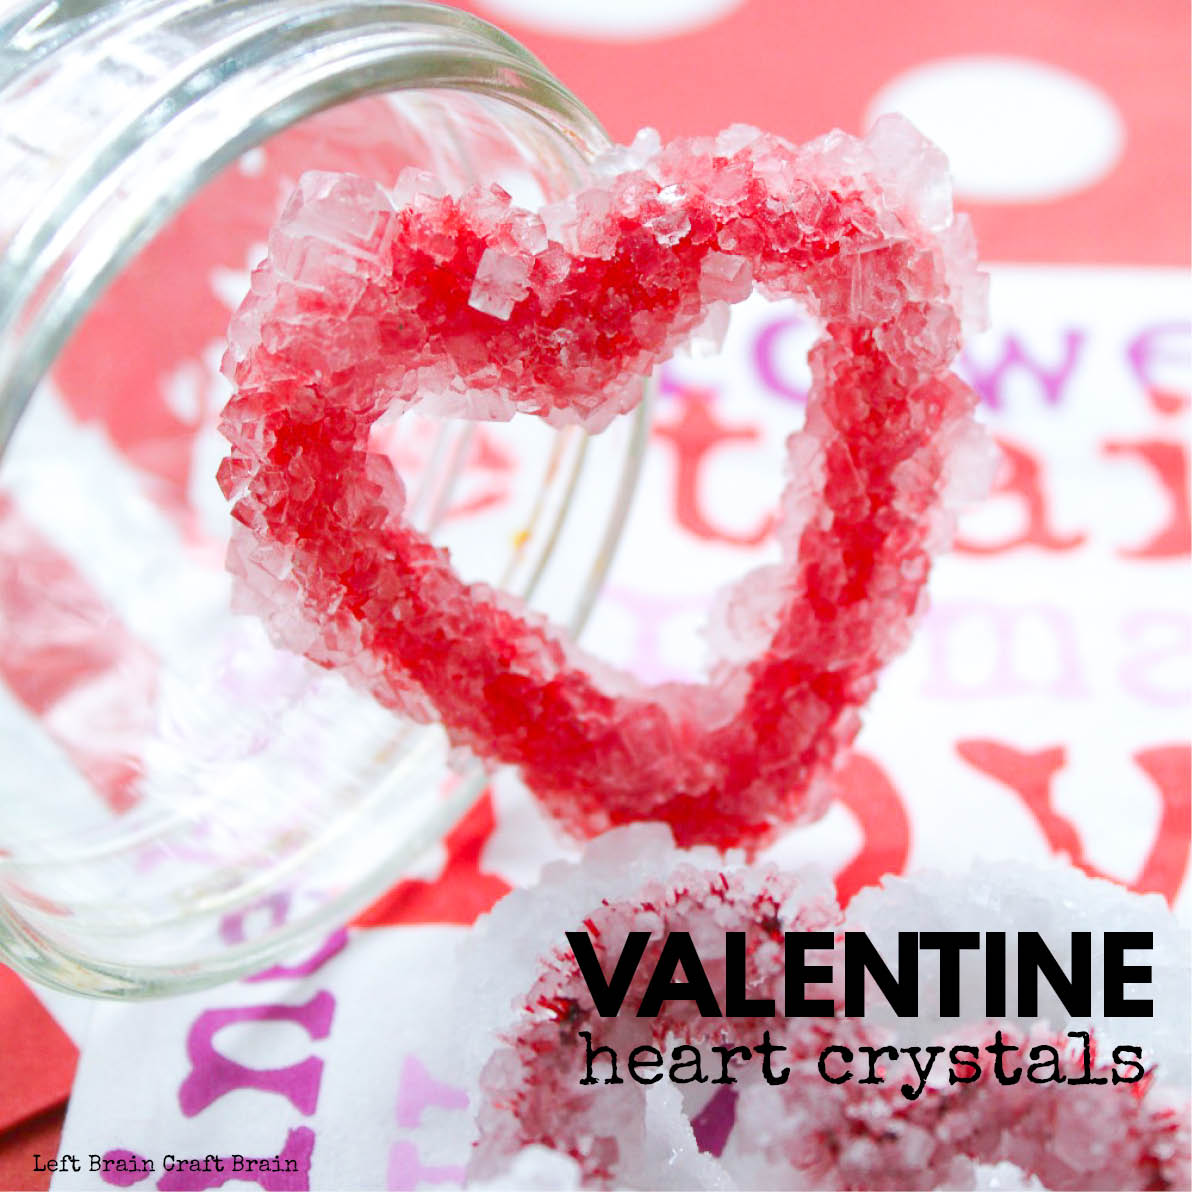 Grow these lovely Valentine Heart Borax Crystals for a fun science experiment this February. Kids will love customizing their hearts and watching the crystals grow.